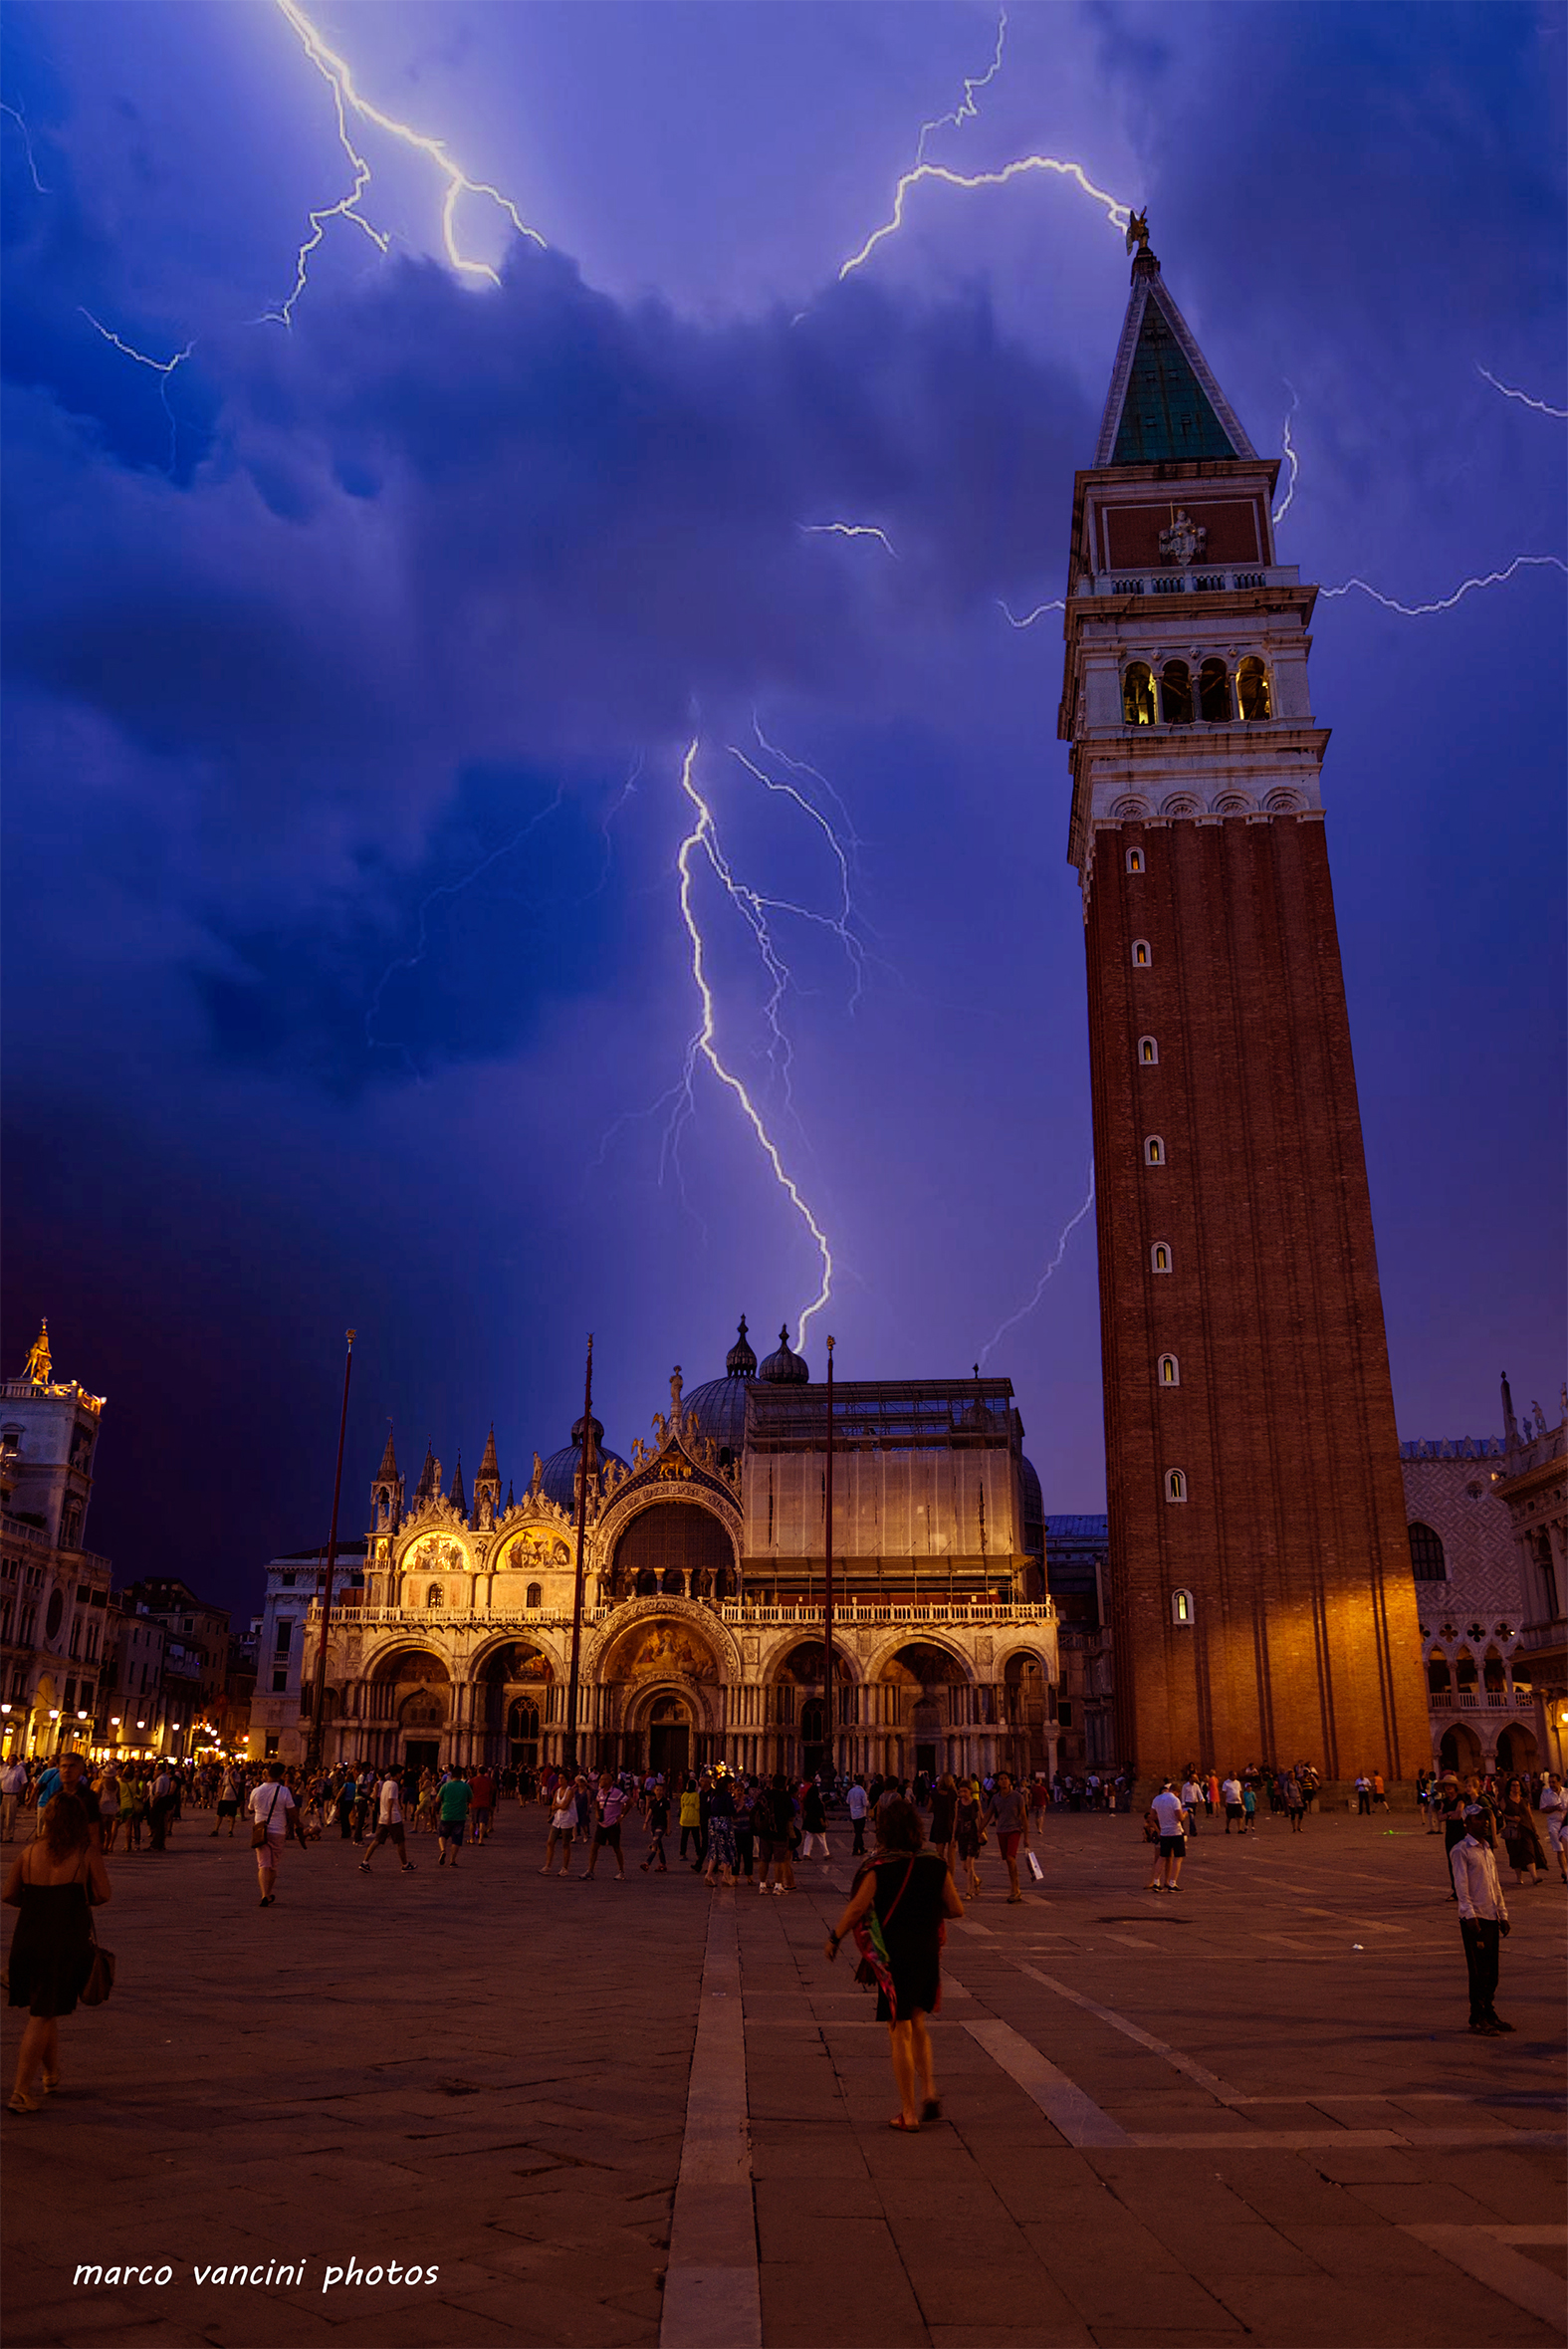 Lightning moments of San Marco in Venice...